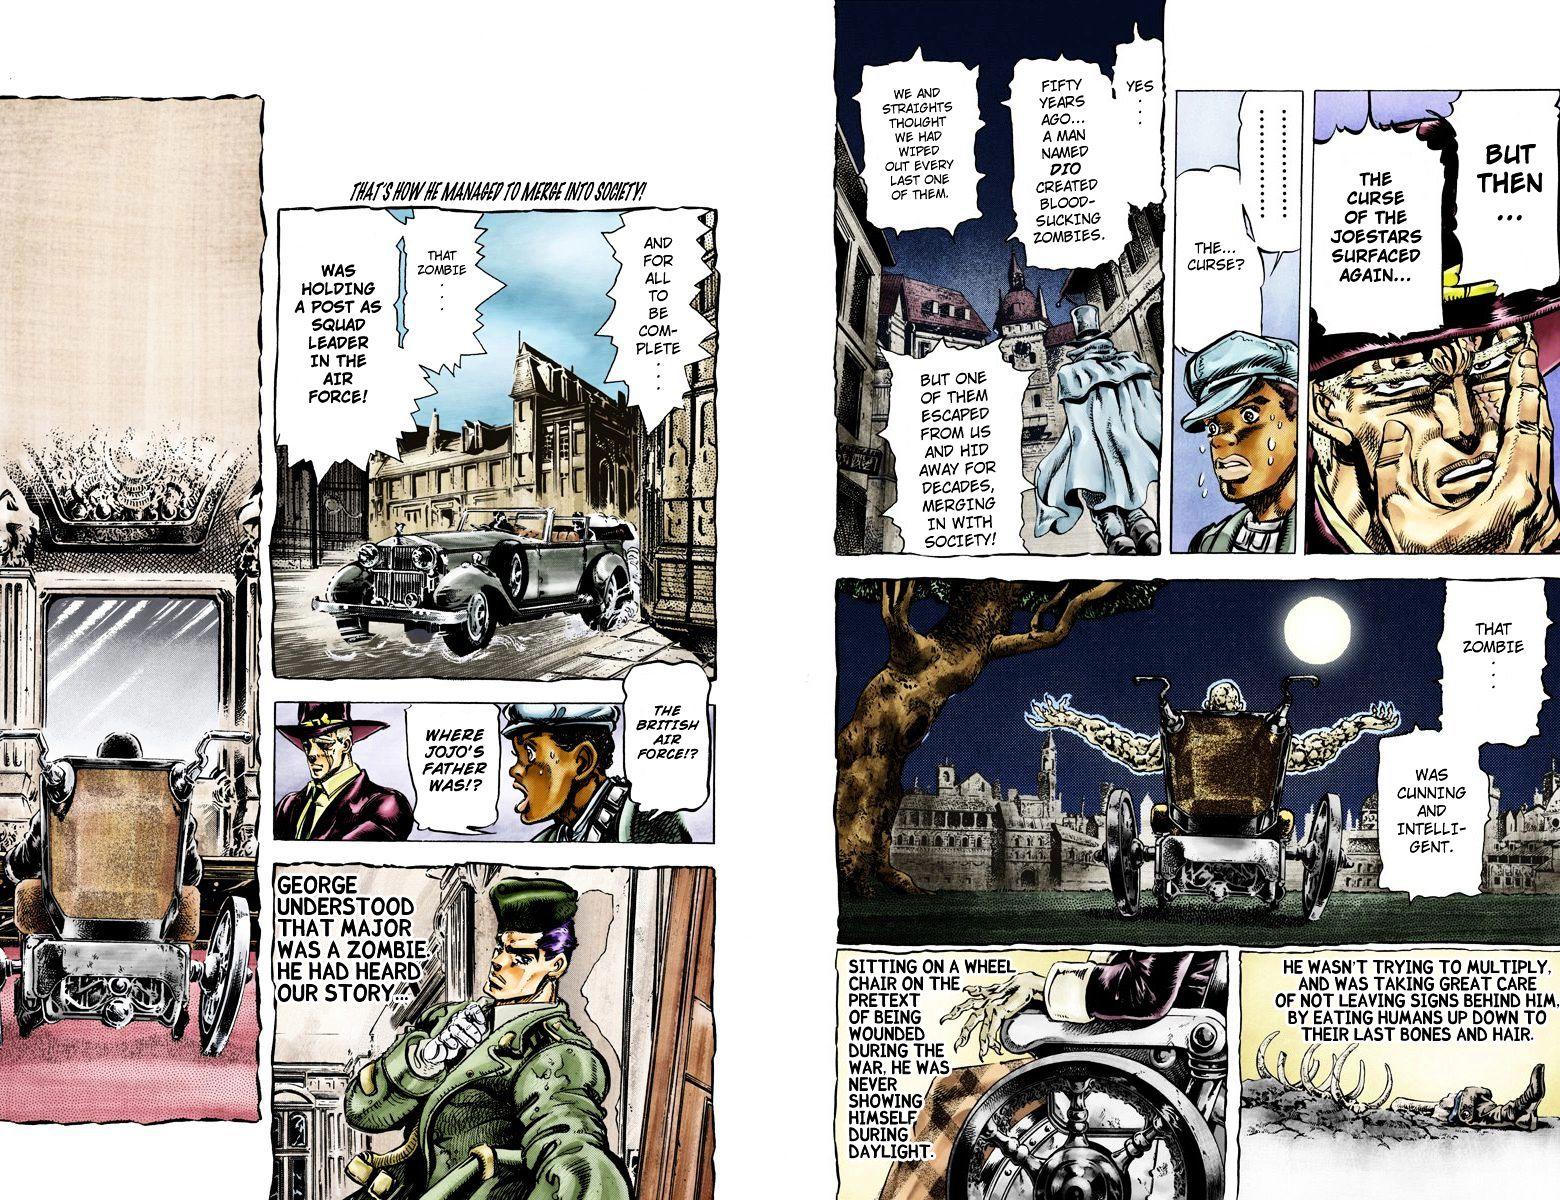 Jojo's Bizarre Adventure Vol.12 Chapter 108 : The Tragedy Of George Joestar (Official Color Scans) page 5 - 